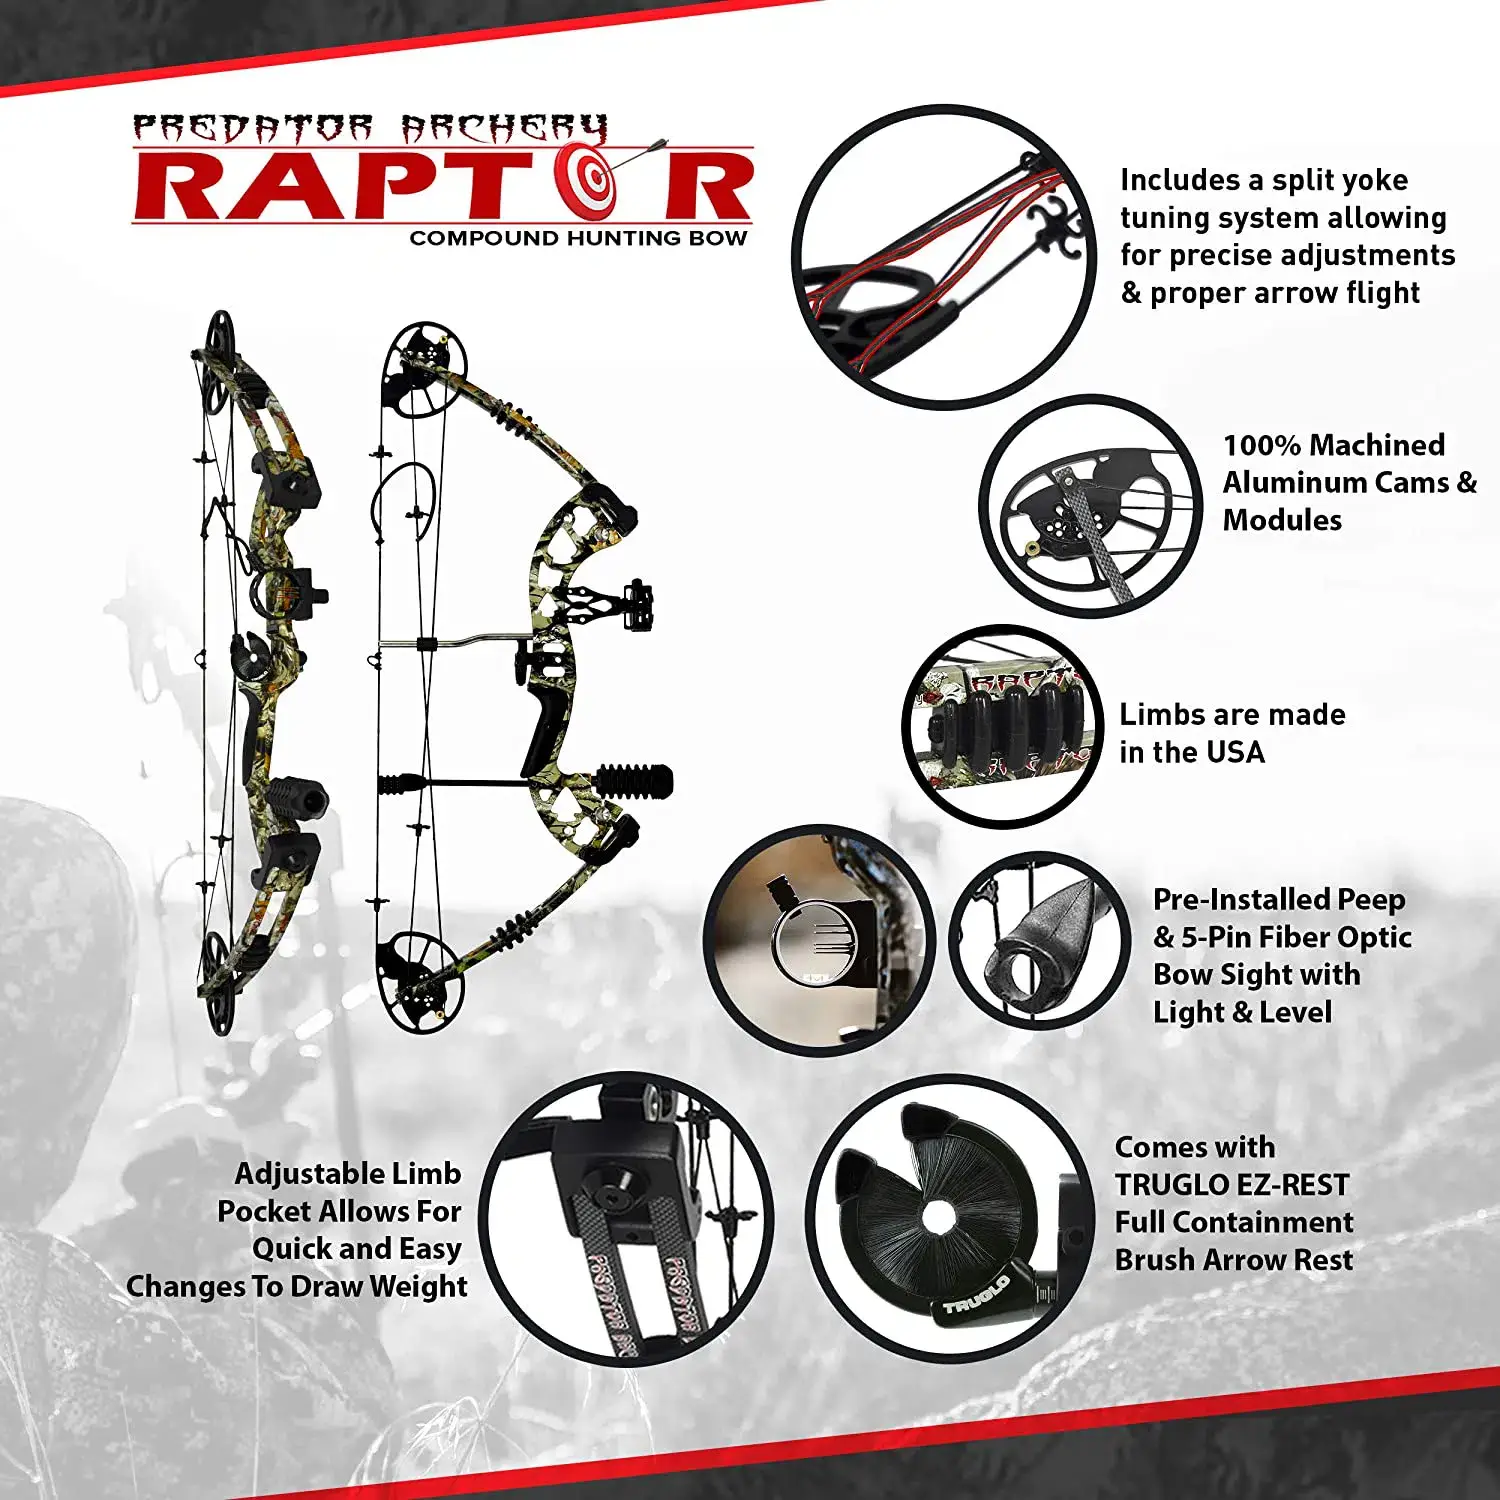 Raptor Compound Hunting Bow Kit review